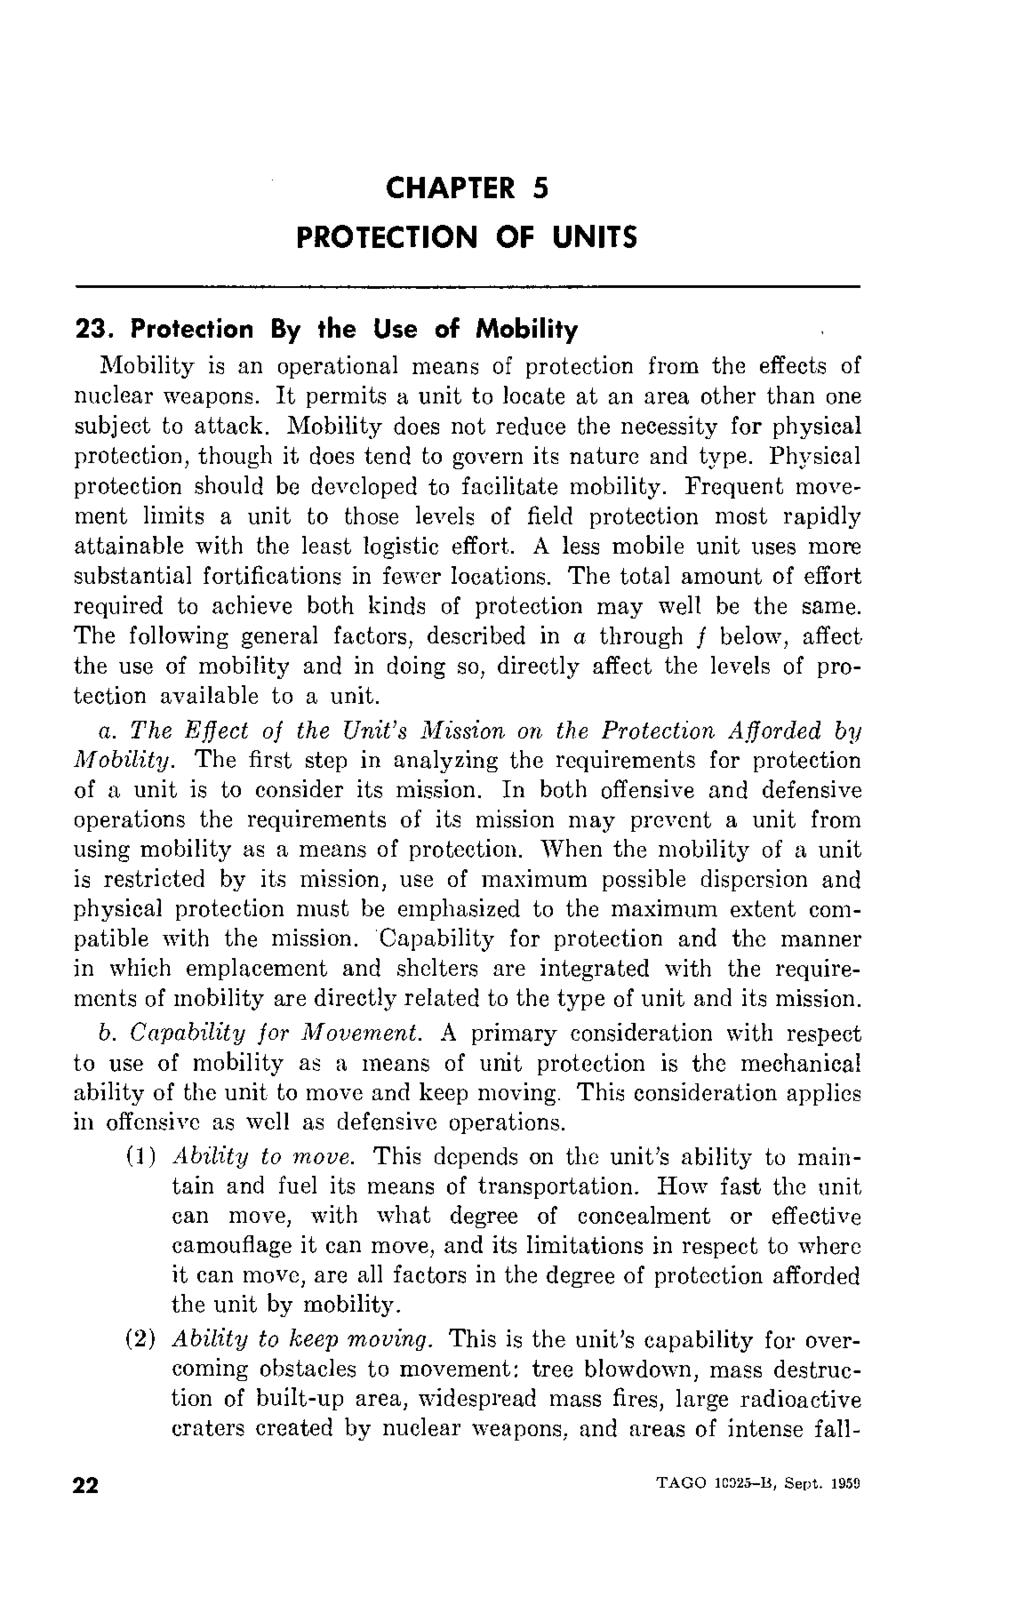 CHAPTER 5 PROTECTION OF UNITS 23. Protection By the Use of Mobility Mobility is an operational means of protection from the effects of nuclear weapons.